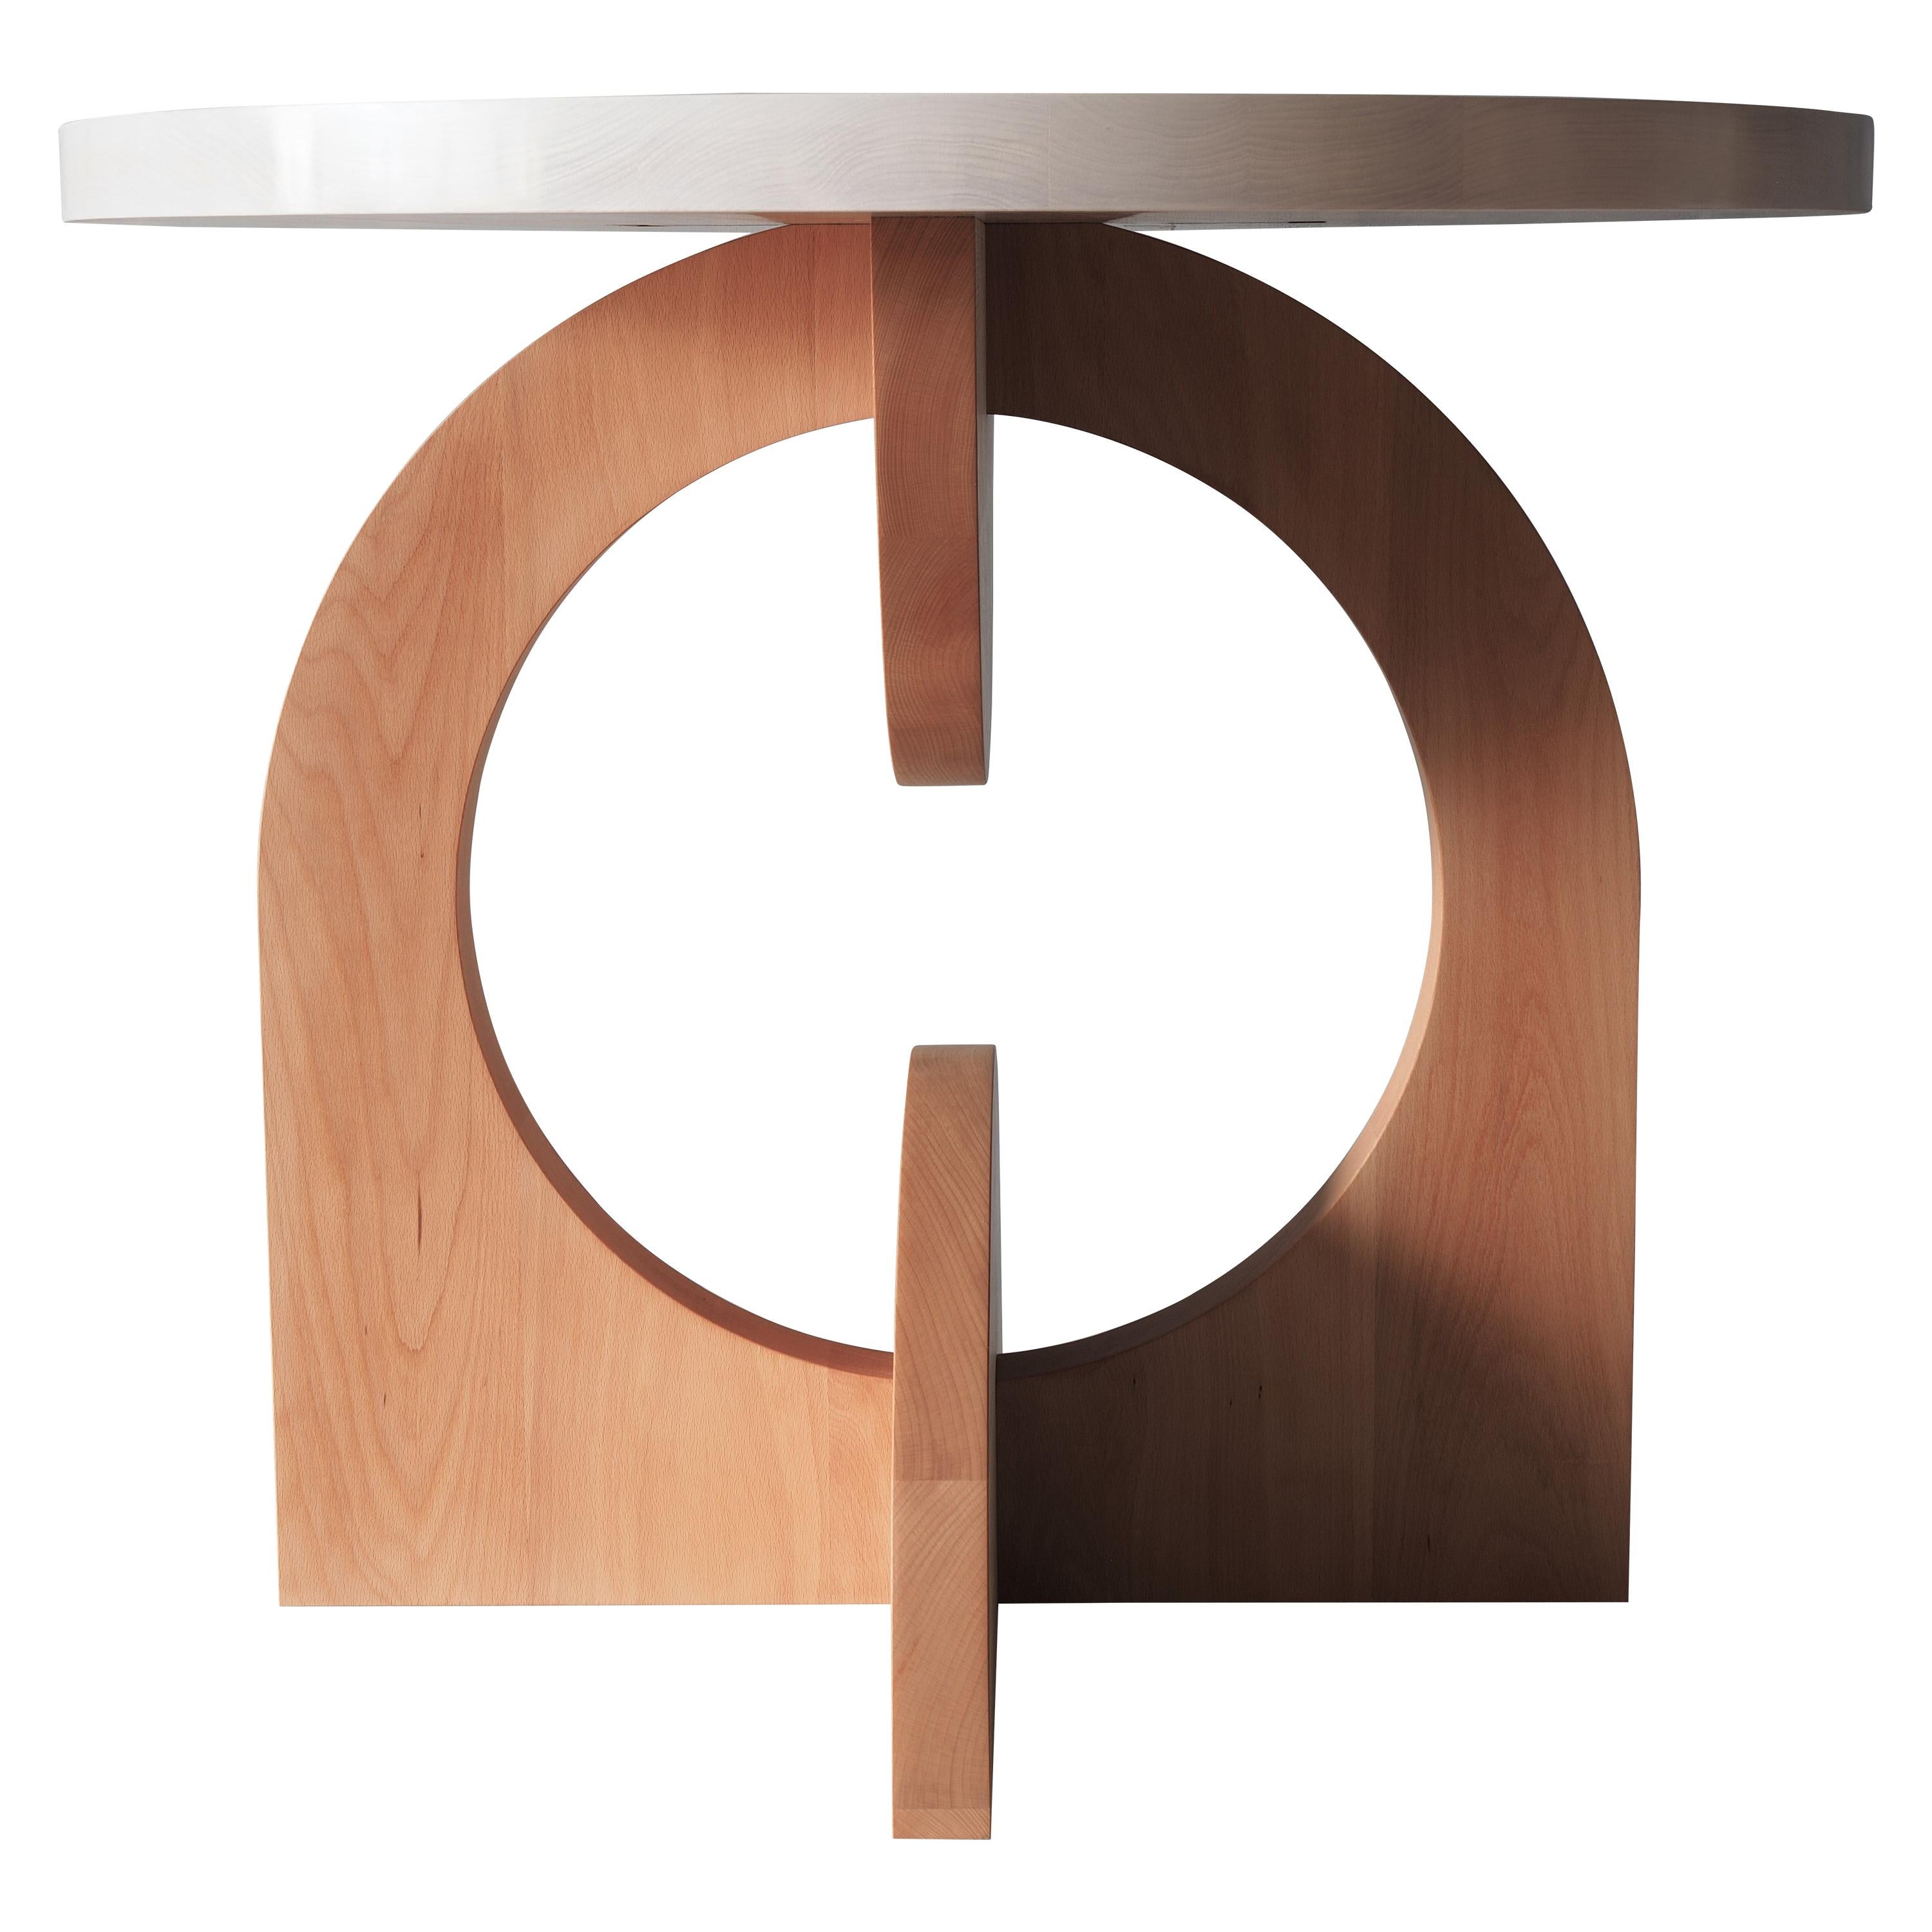 White and Beech Round Dual Crescent Dining Table by MSJ Furniture Studio